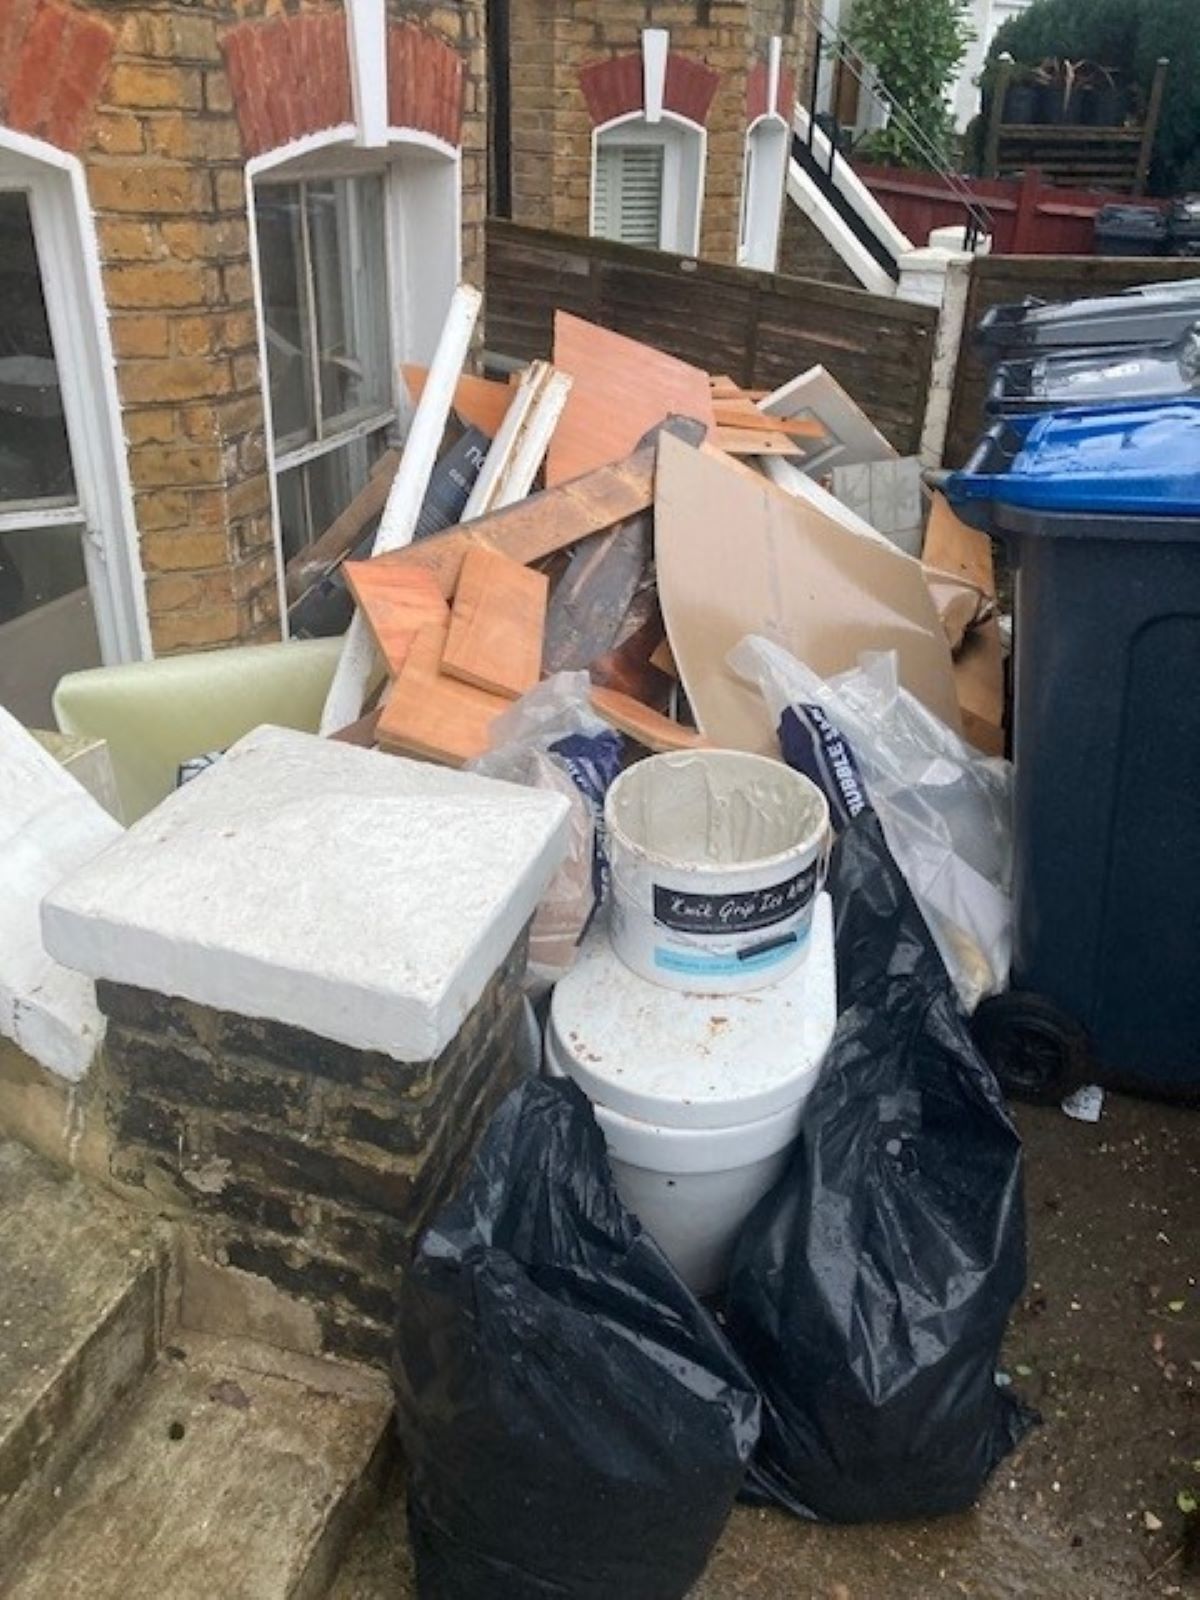 Domestic and commercial waste awaiting clearance in Kent